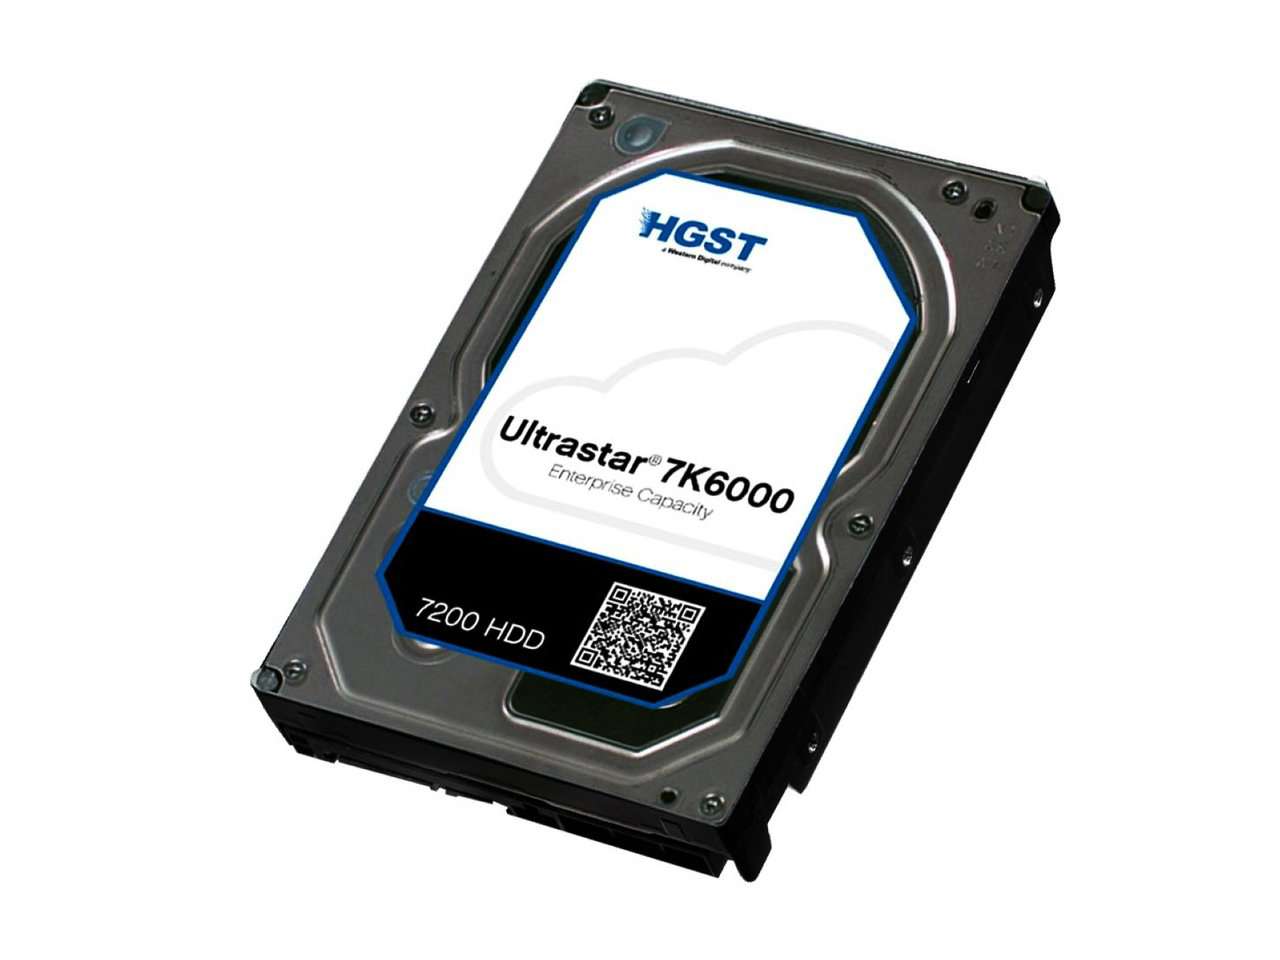 HGST Ultrastar 7K6000 0F22790  HUS726060AL4210 6TB 7.2K RPM SAS 12Gb/s 4Kn 128MB Cache 3.5" ISE Manufacturer Recertified HDD